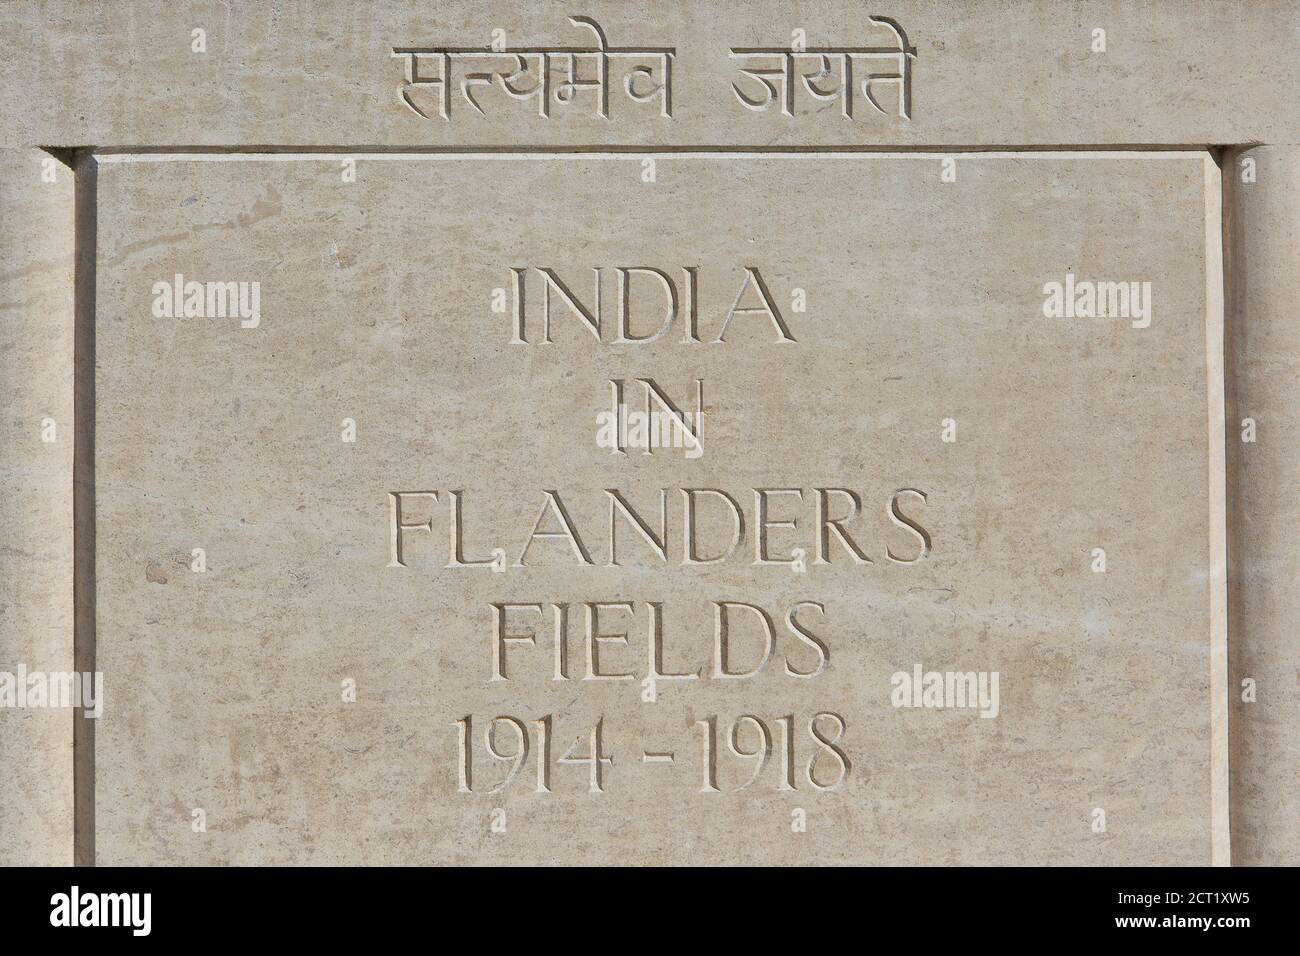 Close-up of a commemorative plaque at the Memorial for the Indian Forces that fought during World War I in Ypres, Belgium Stock Photo